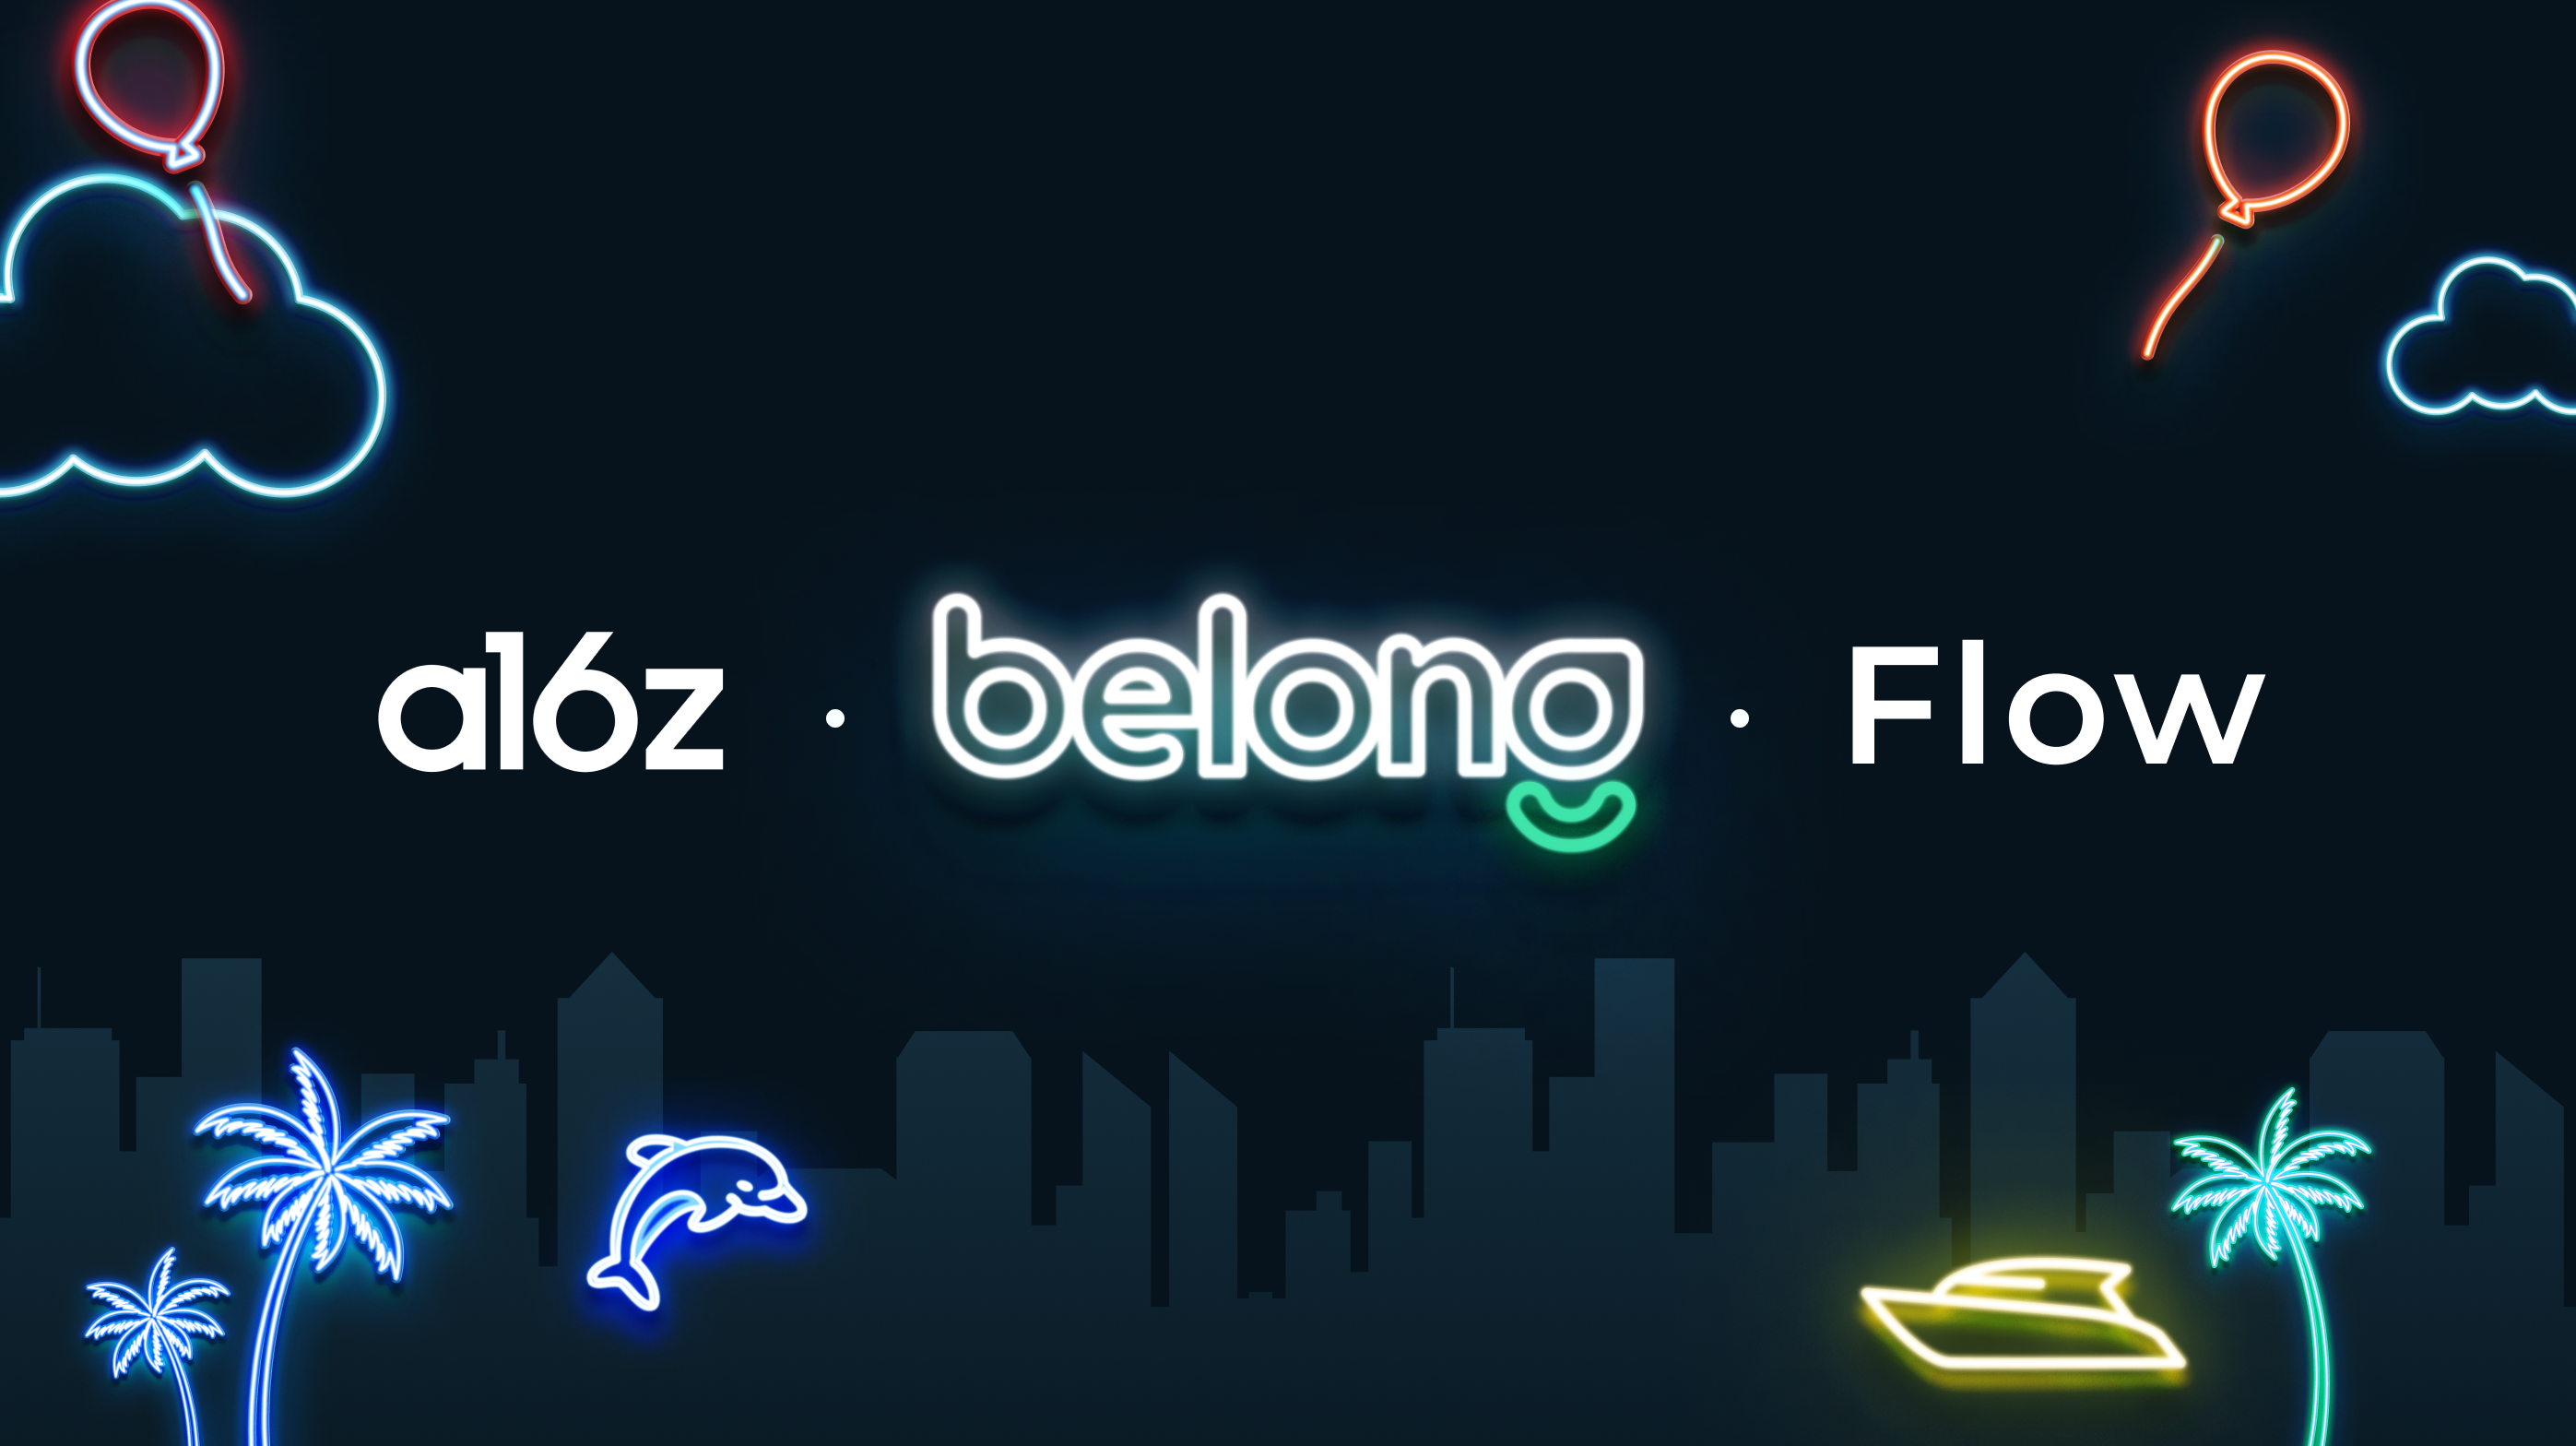 A black background with neon images of a palm tree, balloons, clouds and the words 'a16z', 'Belong', and 'Flow'